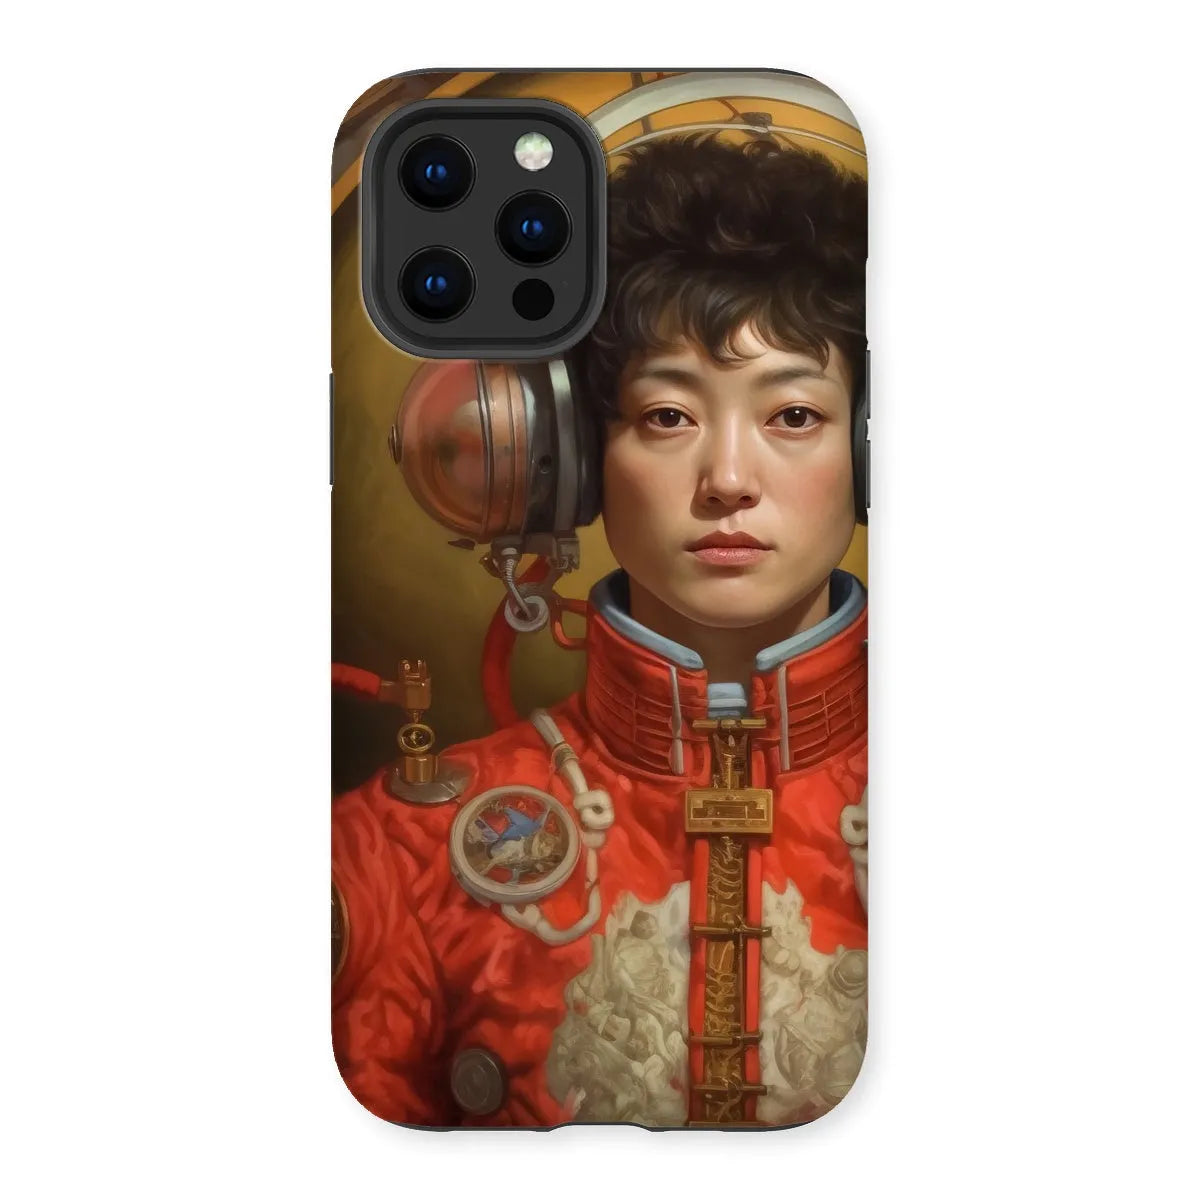 Mùchén - Gay Chinese Astronaut Aesthetic Phone Case - Iphone 12 Pro Max / Matte - Mobile Phone Cases - Aesthetic Art